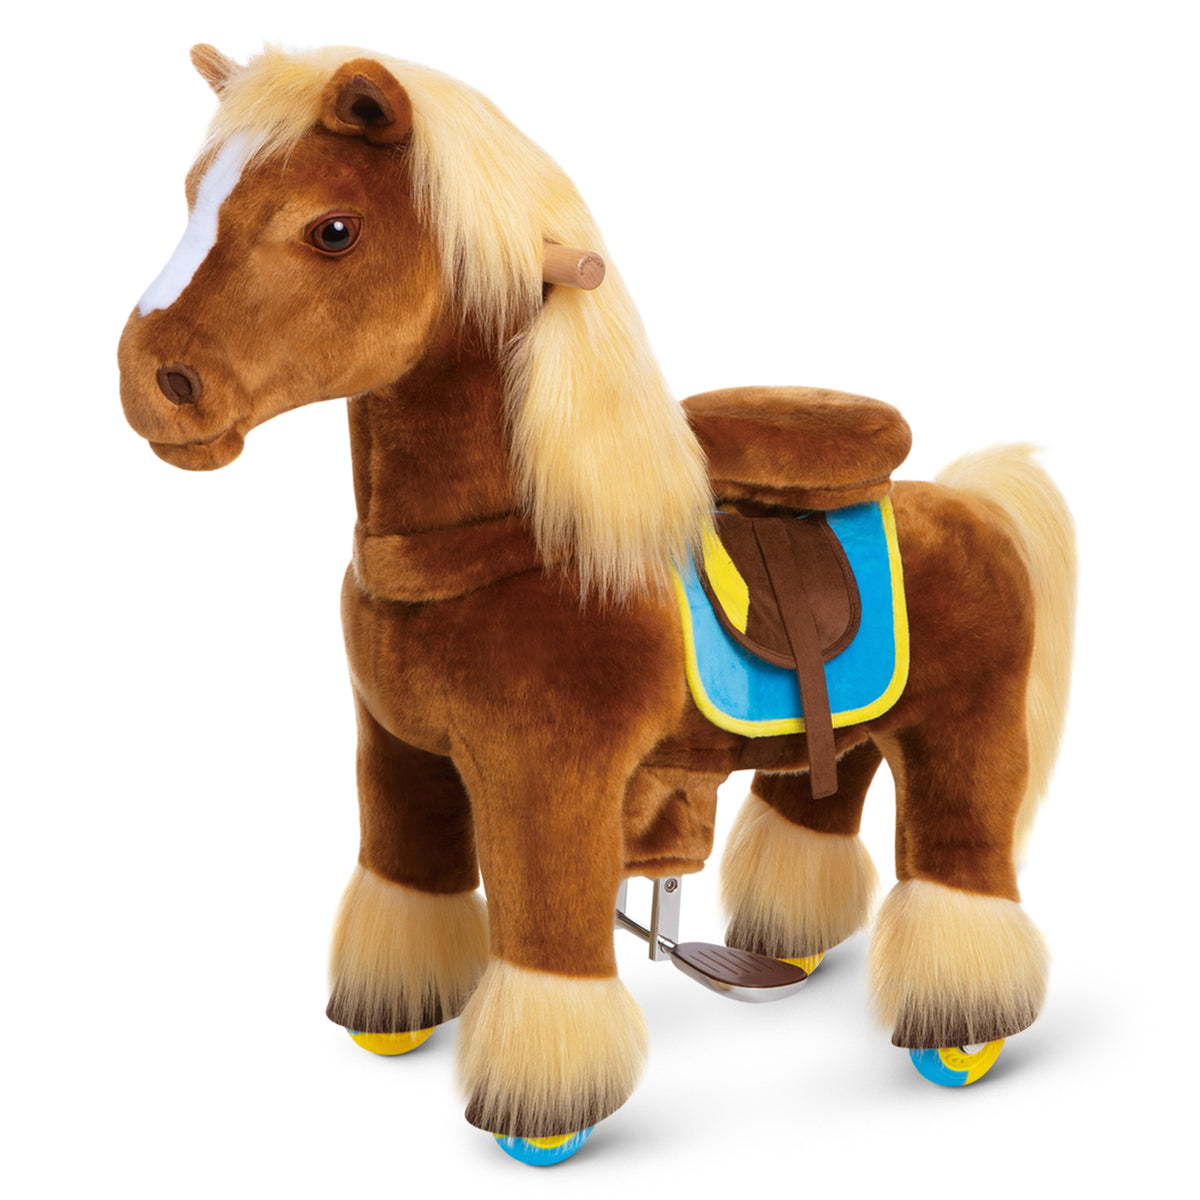 Model X Riding Horse Toy for Age 3-5 Brown